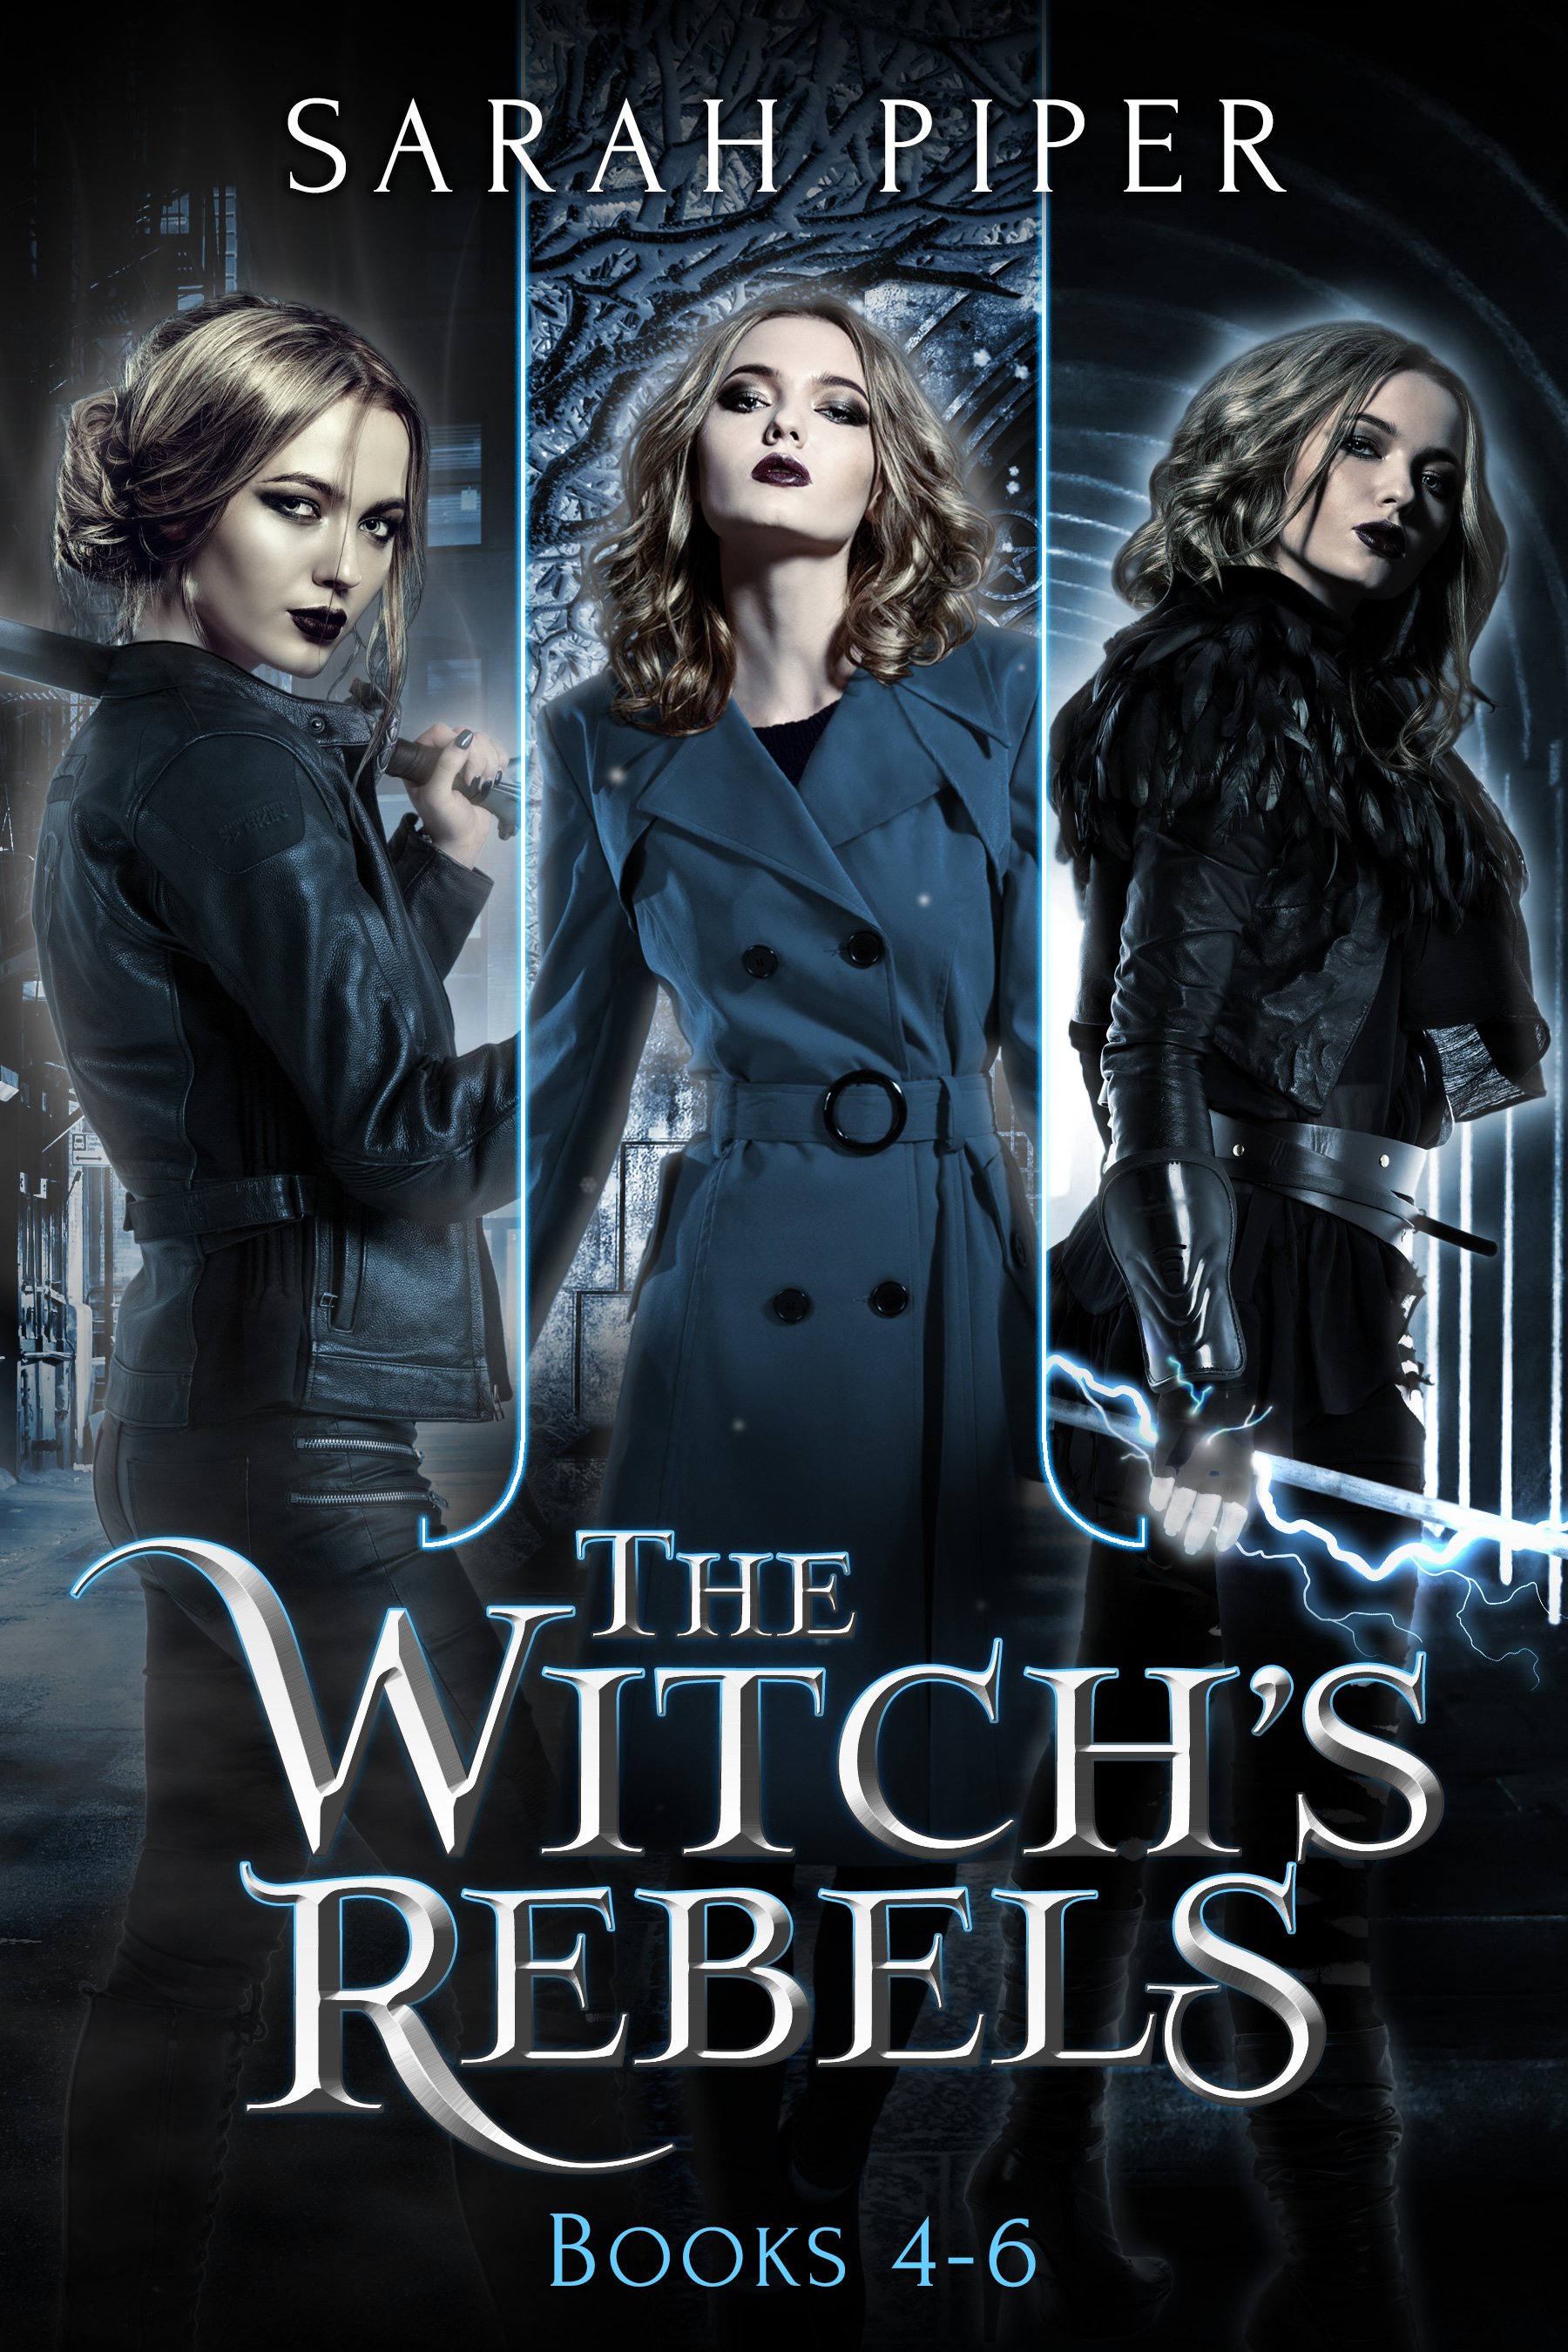 THE WITCH'S REBELS: BOOKS 4-6